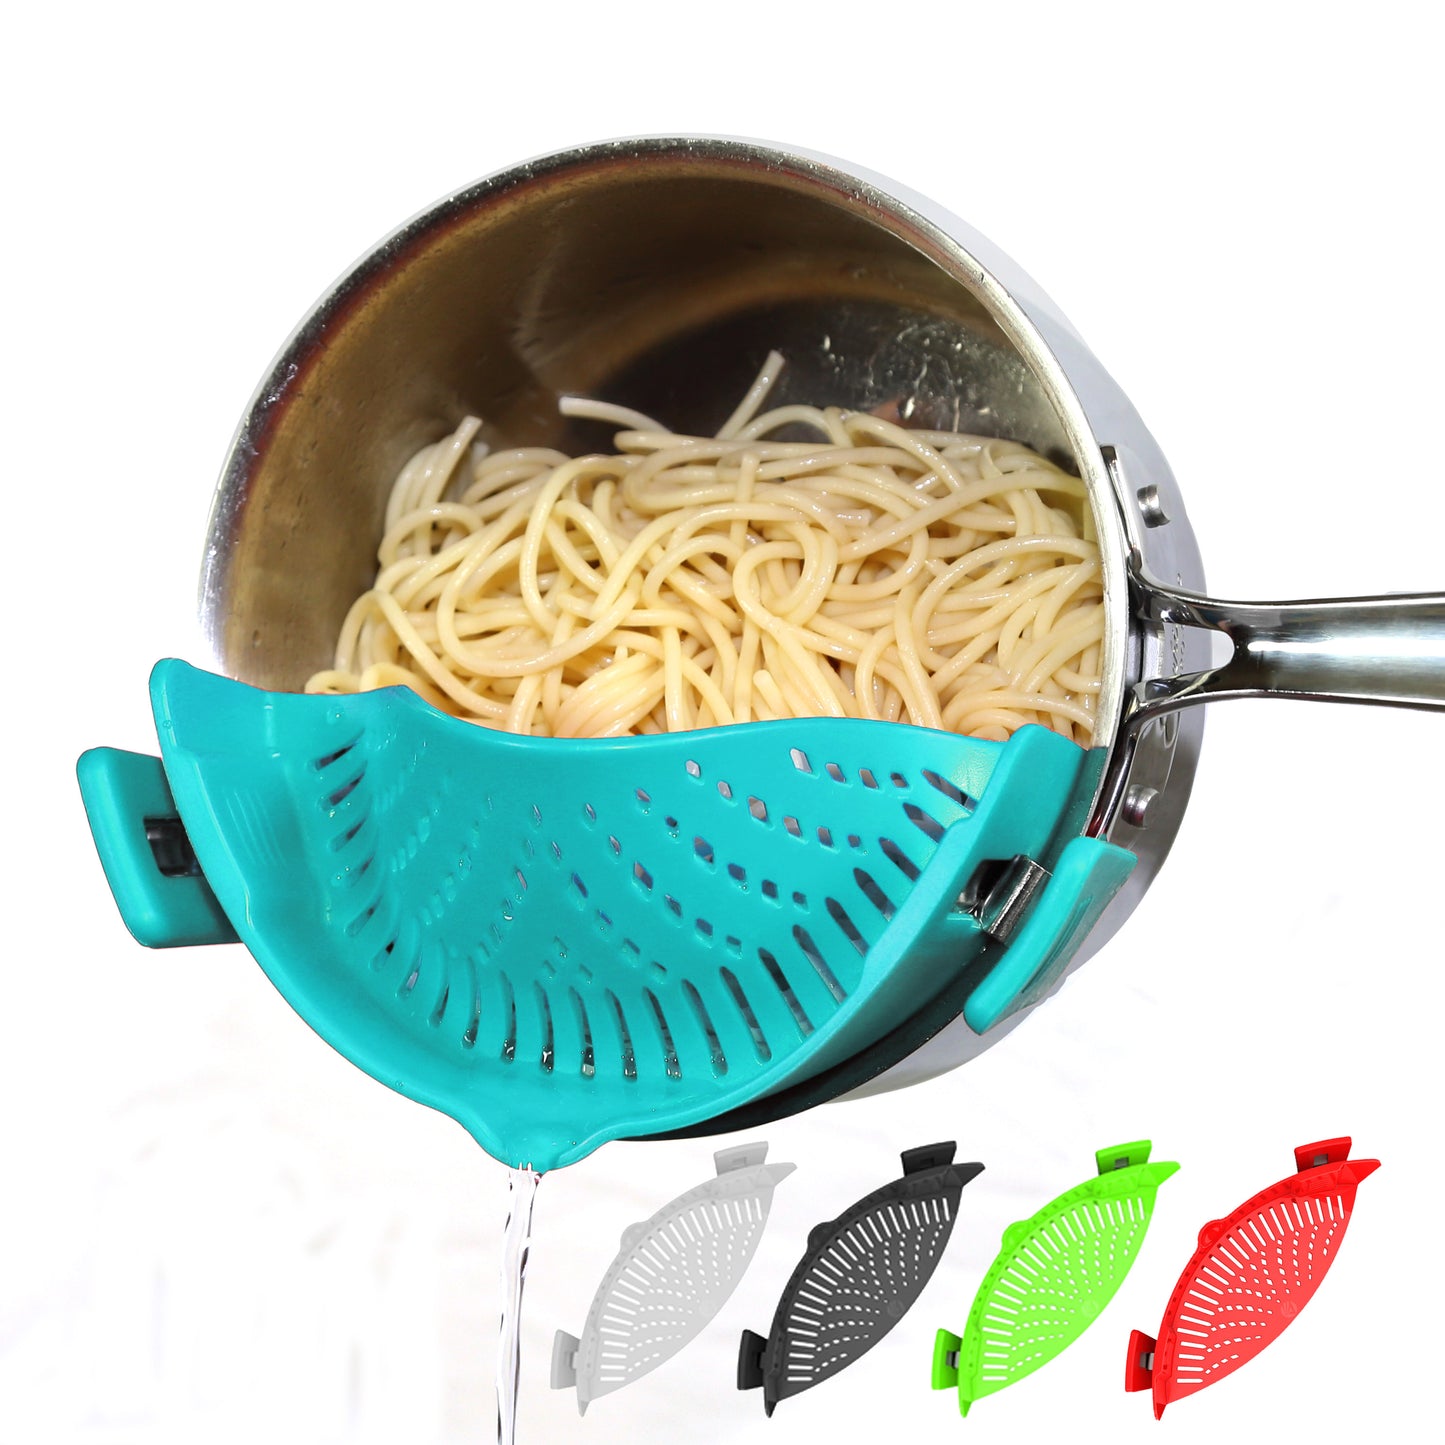 Easy Cooking With This Adjustable Silicone Pot Strainer And Pasta